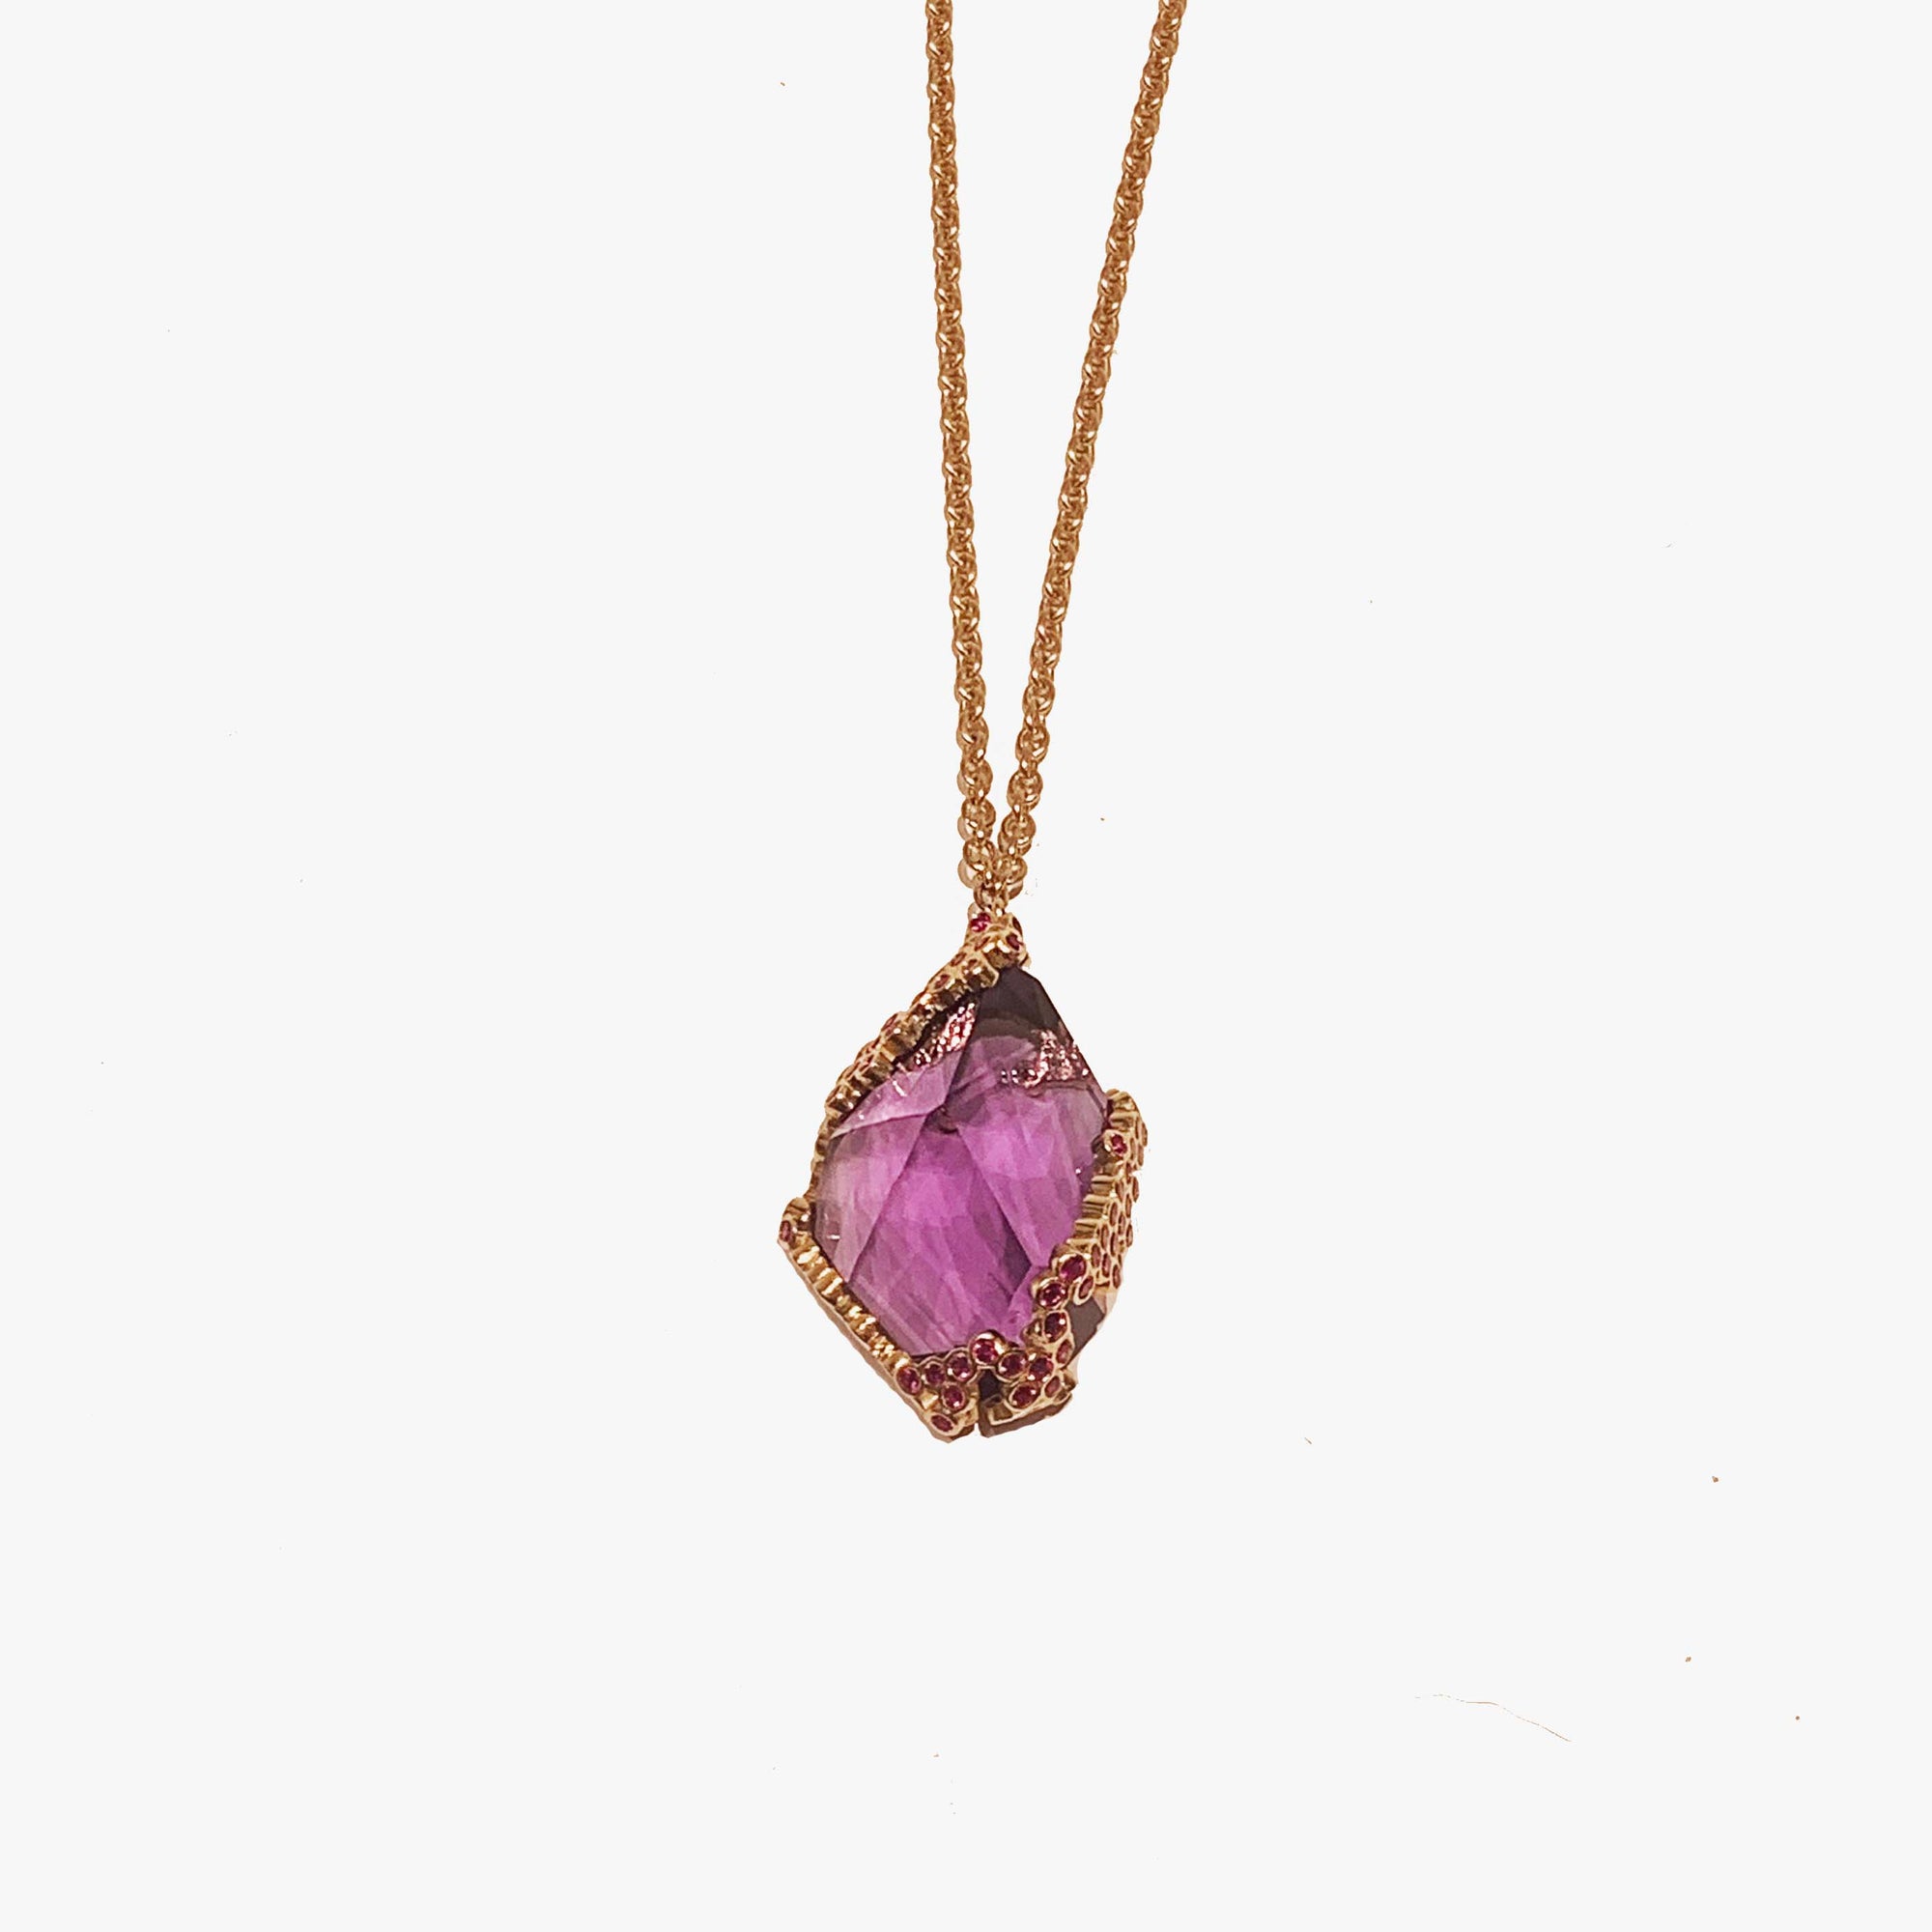 Freeform amethyst pendant necklace with pink sapphire accents